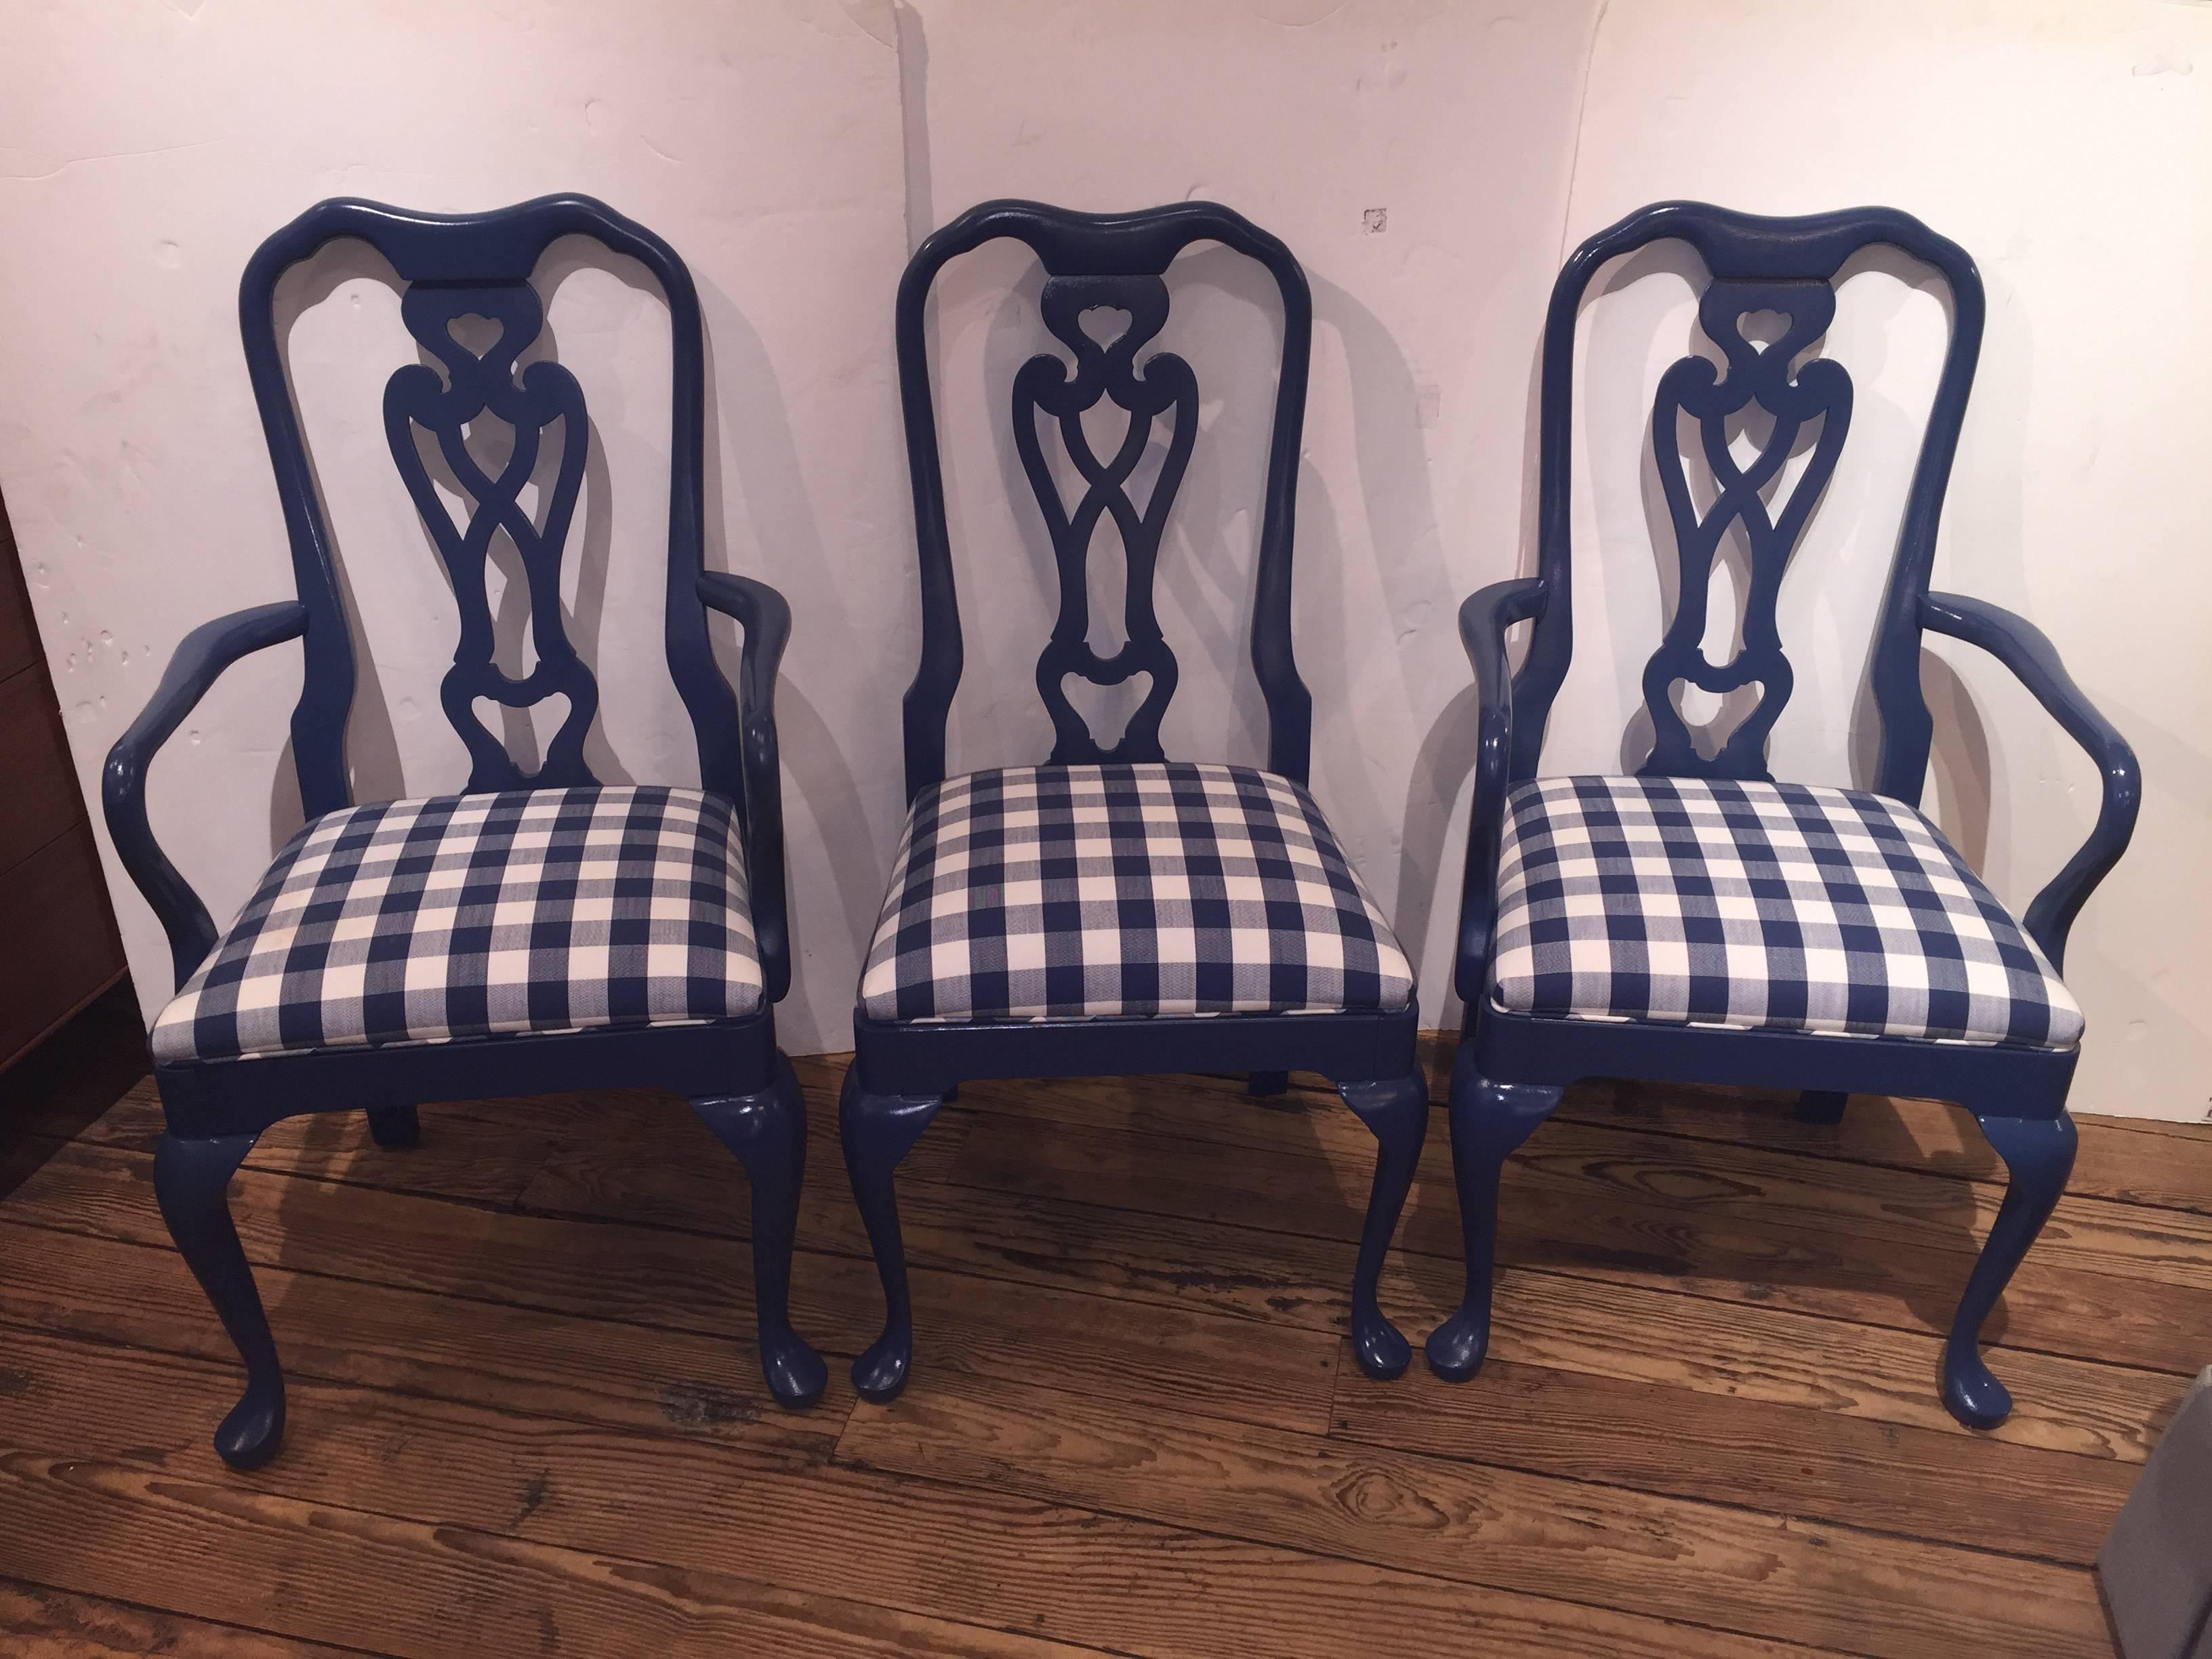 Late 20th Century Sensational Set of Six Lacquered and Gingham Upholstered Dining Chairs